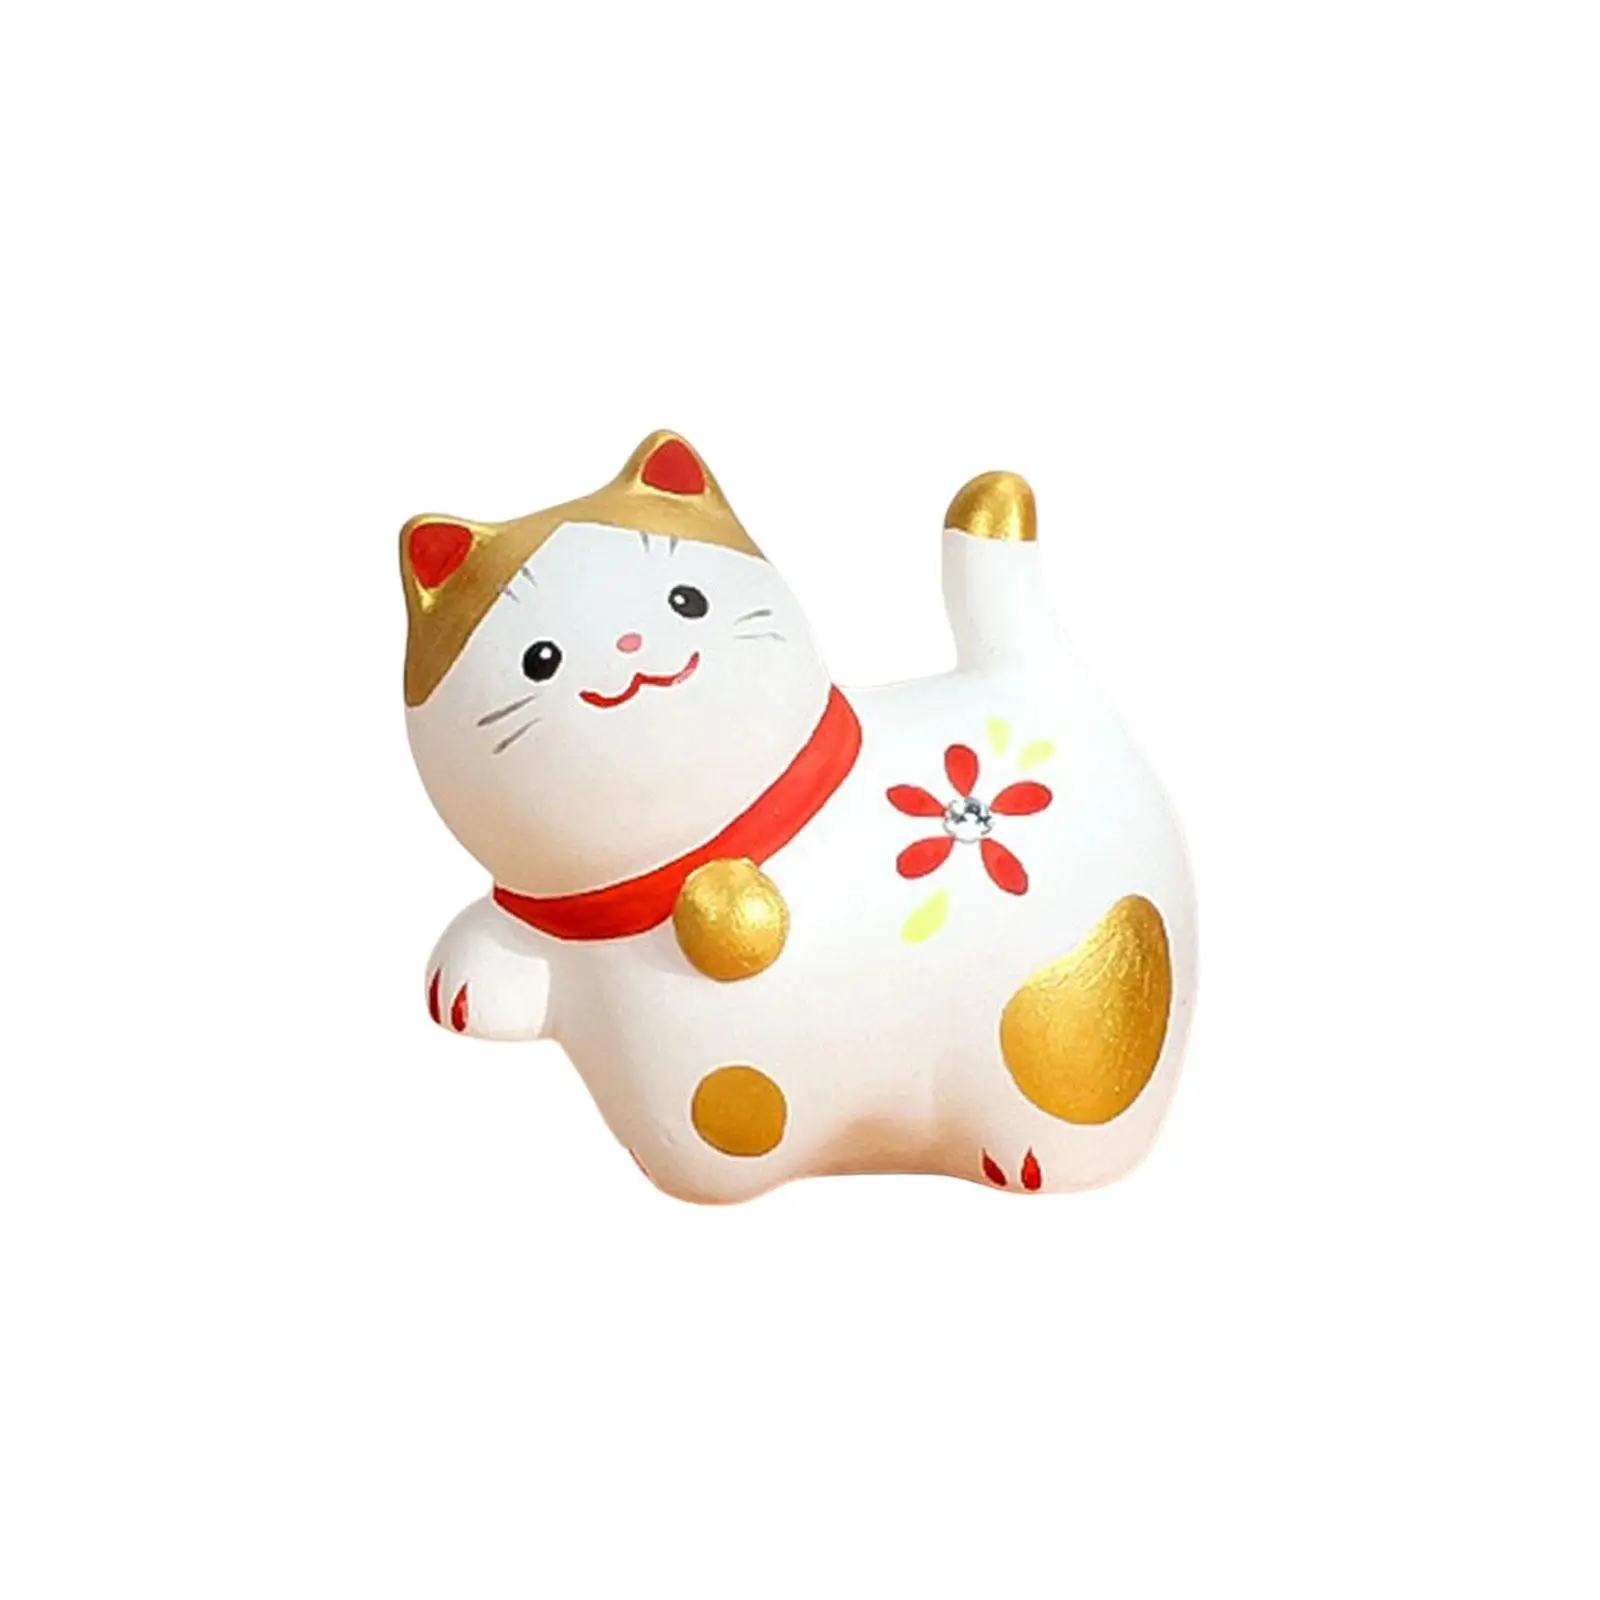 2 Pieces Lucky Cat Figurine Car Dashboard Ornament Small for